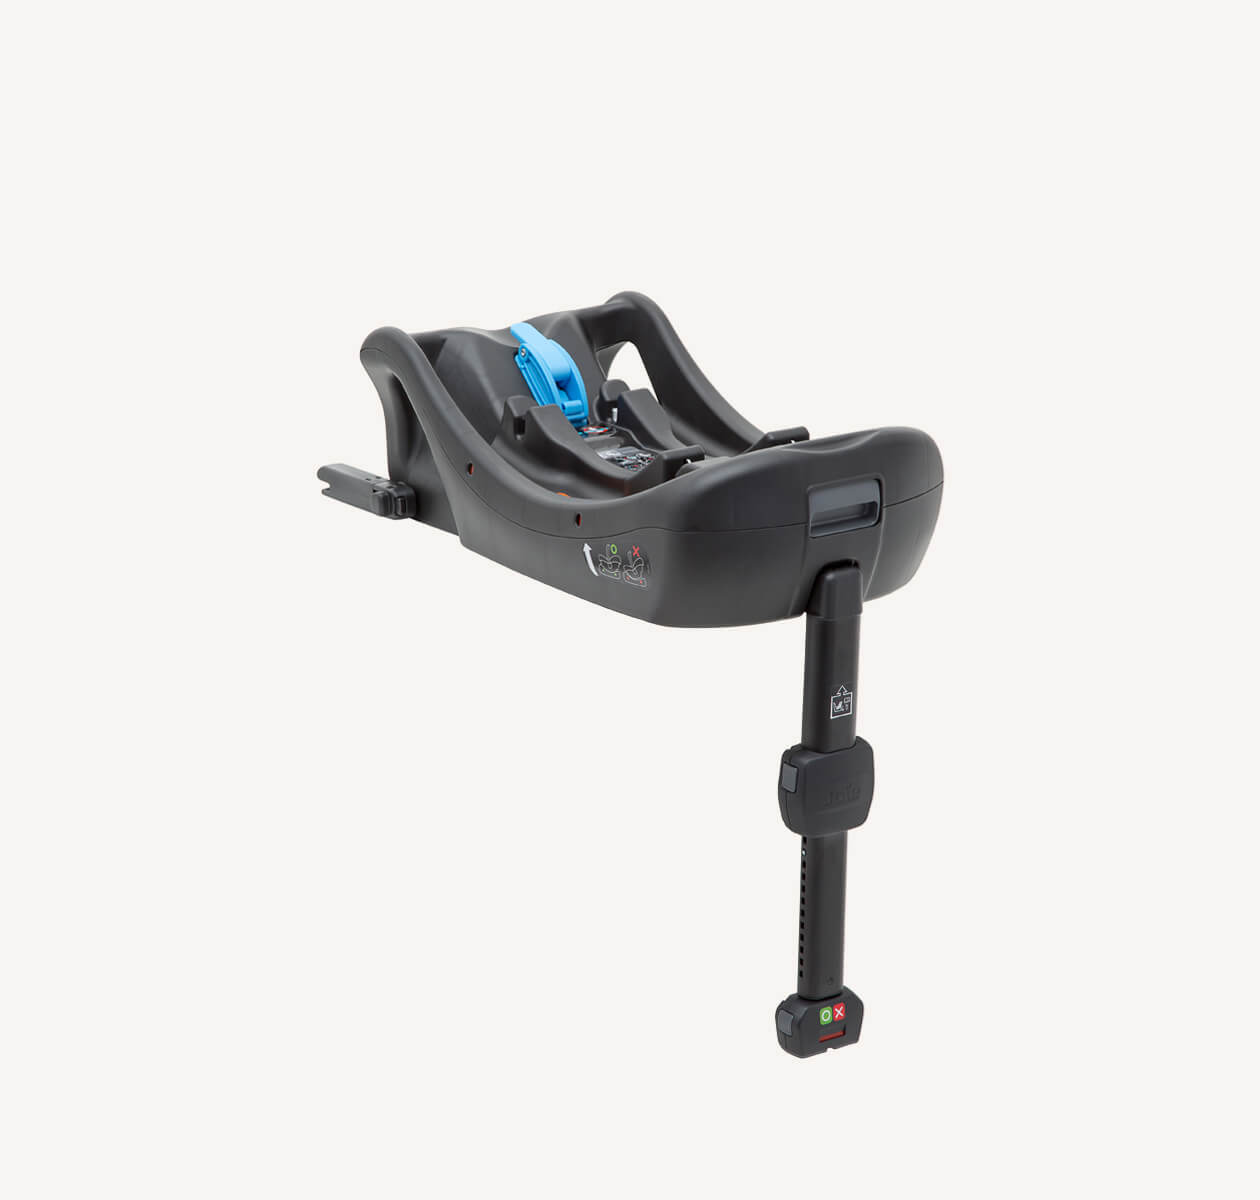  Joie i-base car seat base from a right angle with load leg extended. 